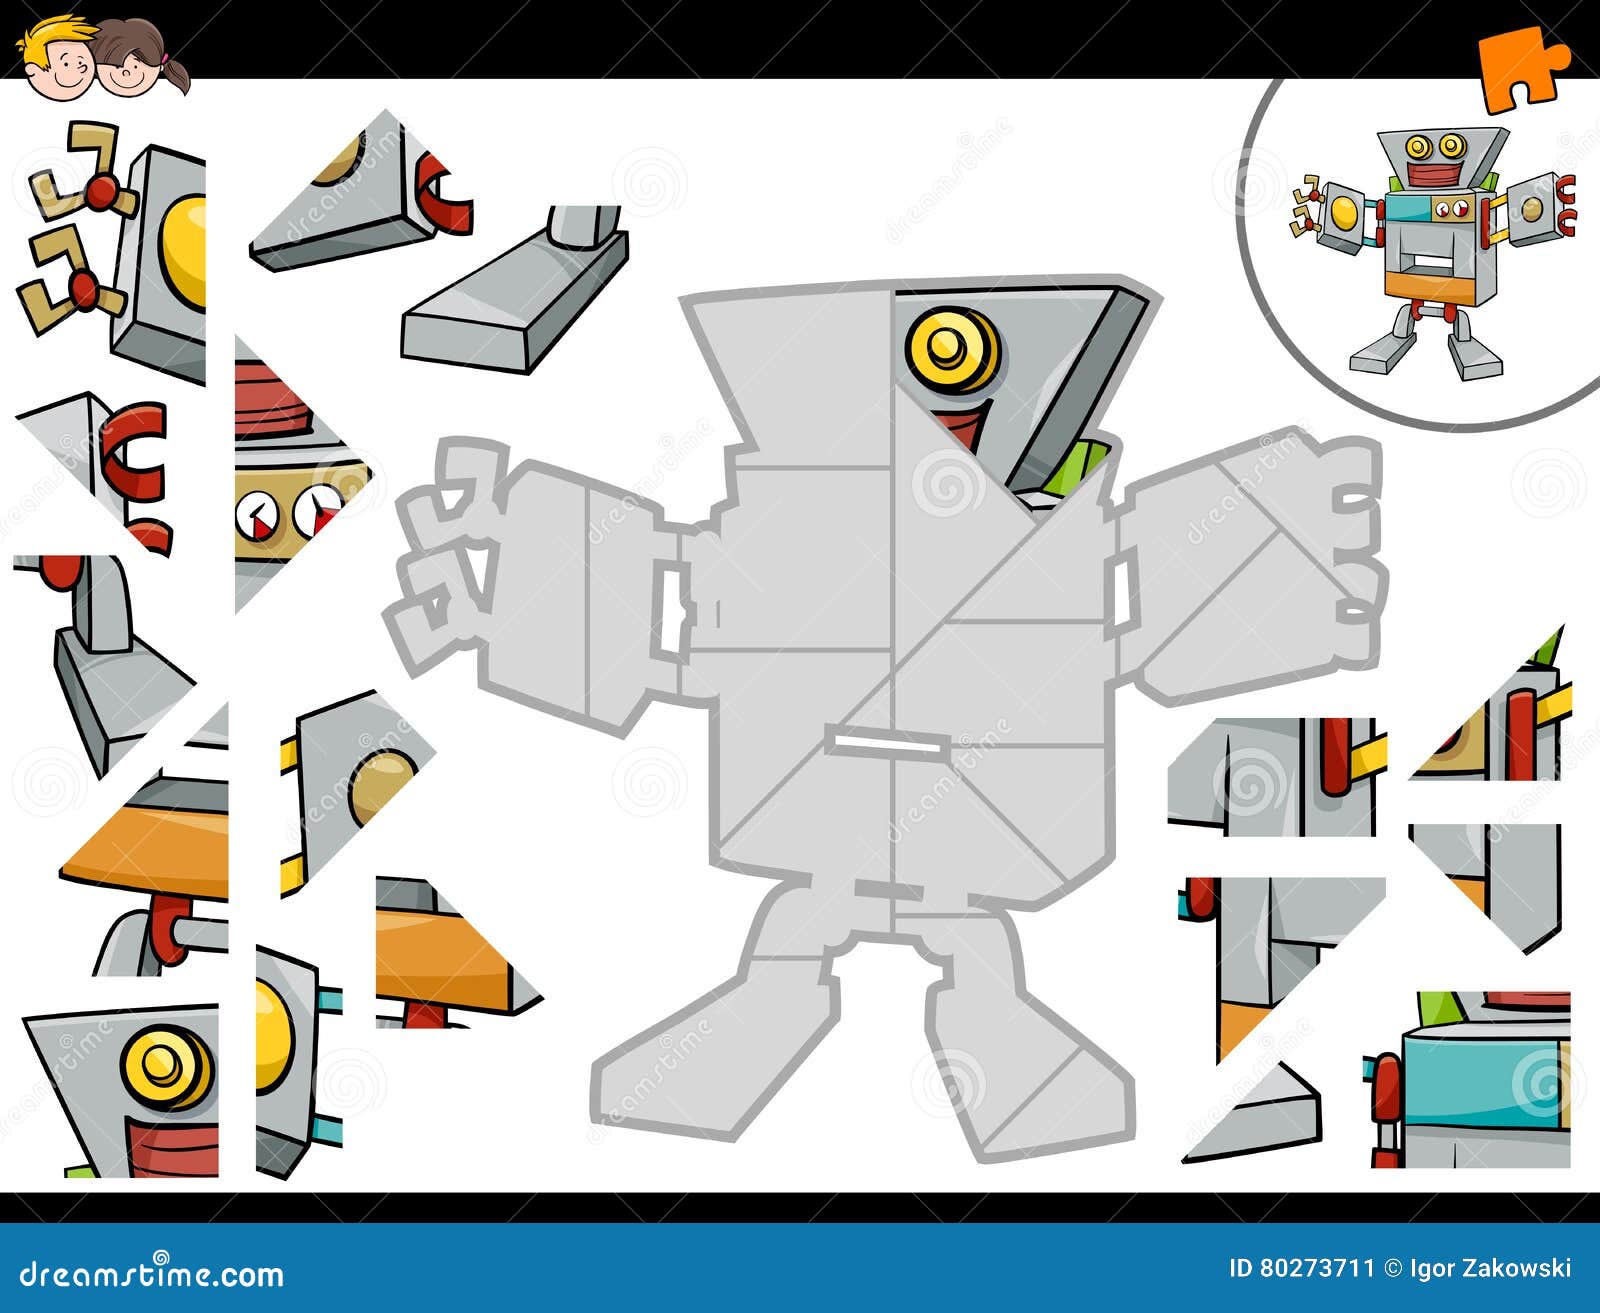 Jigsaw Game with Robot Vector - Illustration jigsaw, 80273711